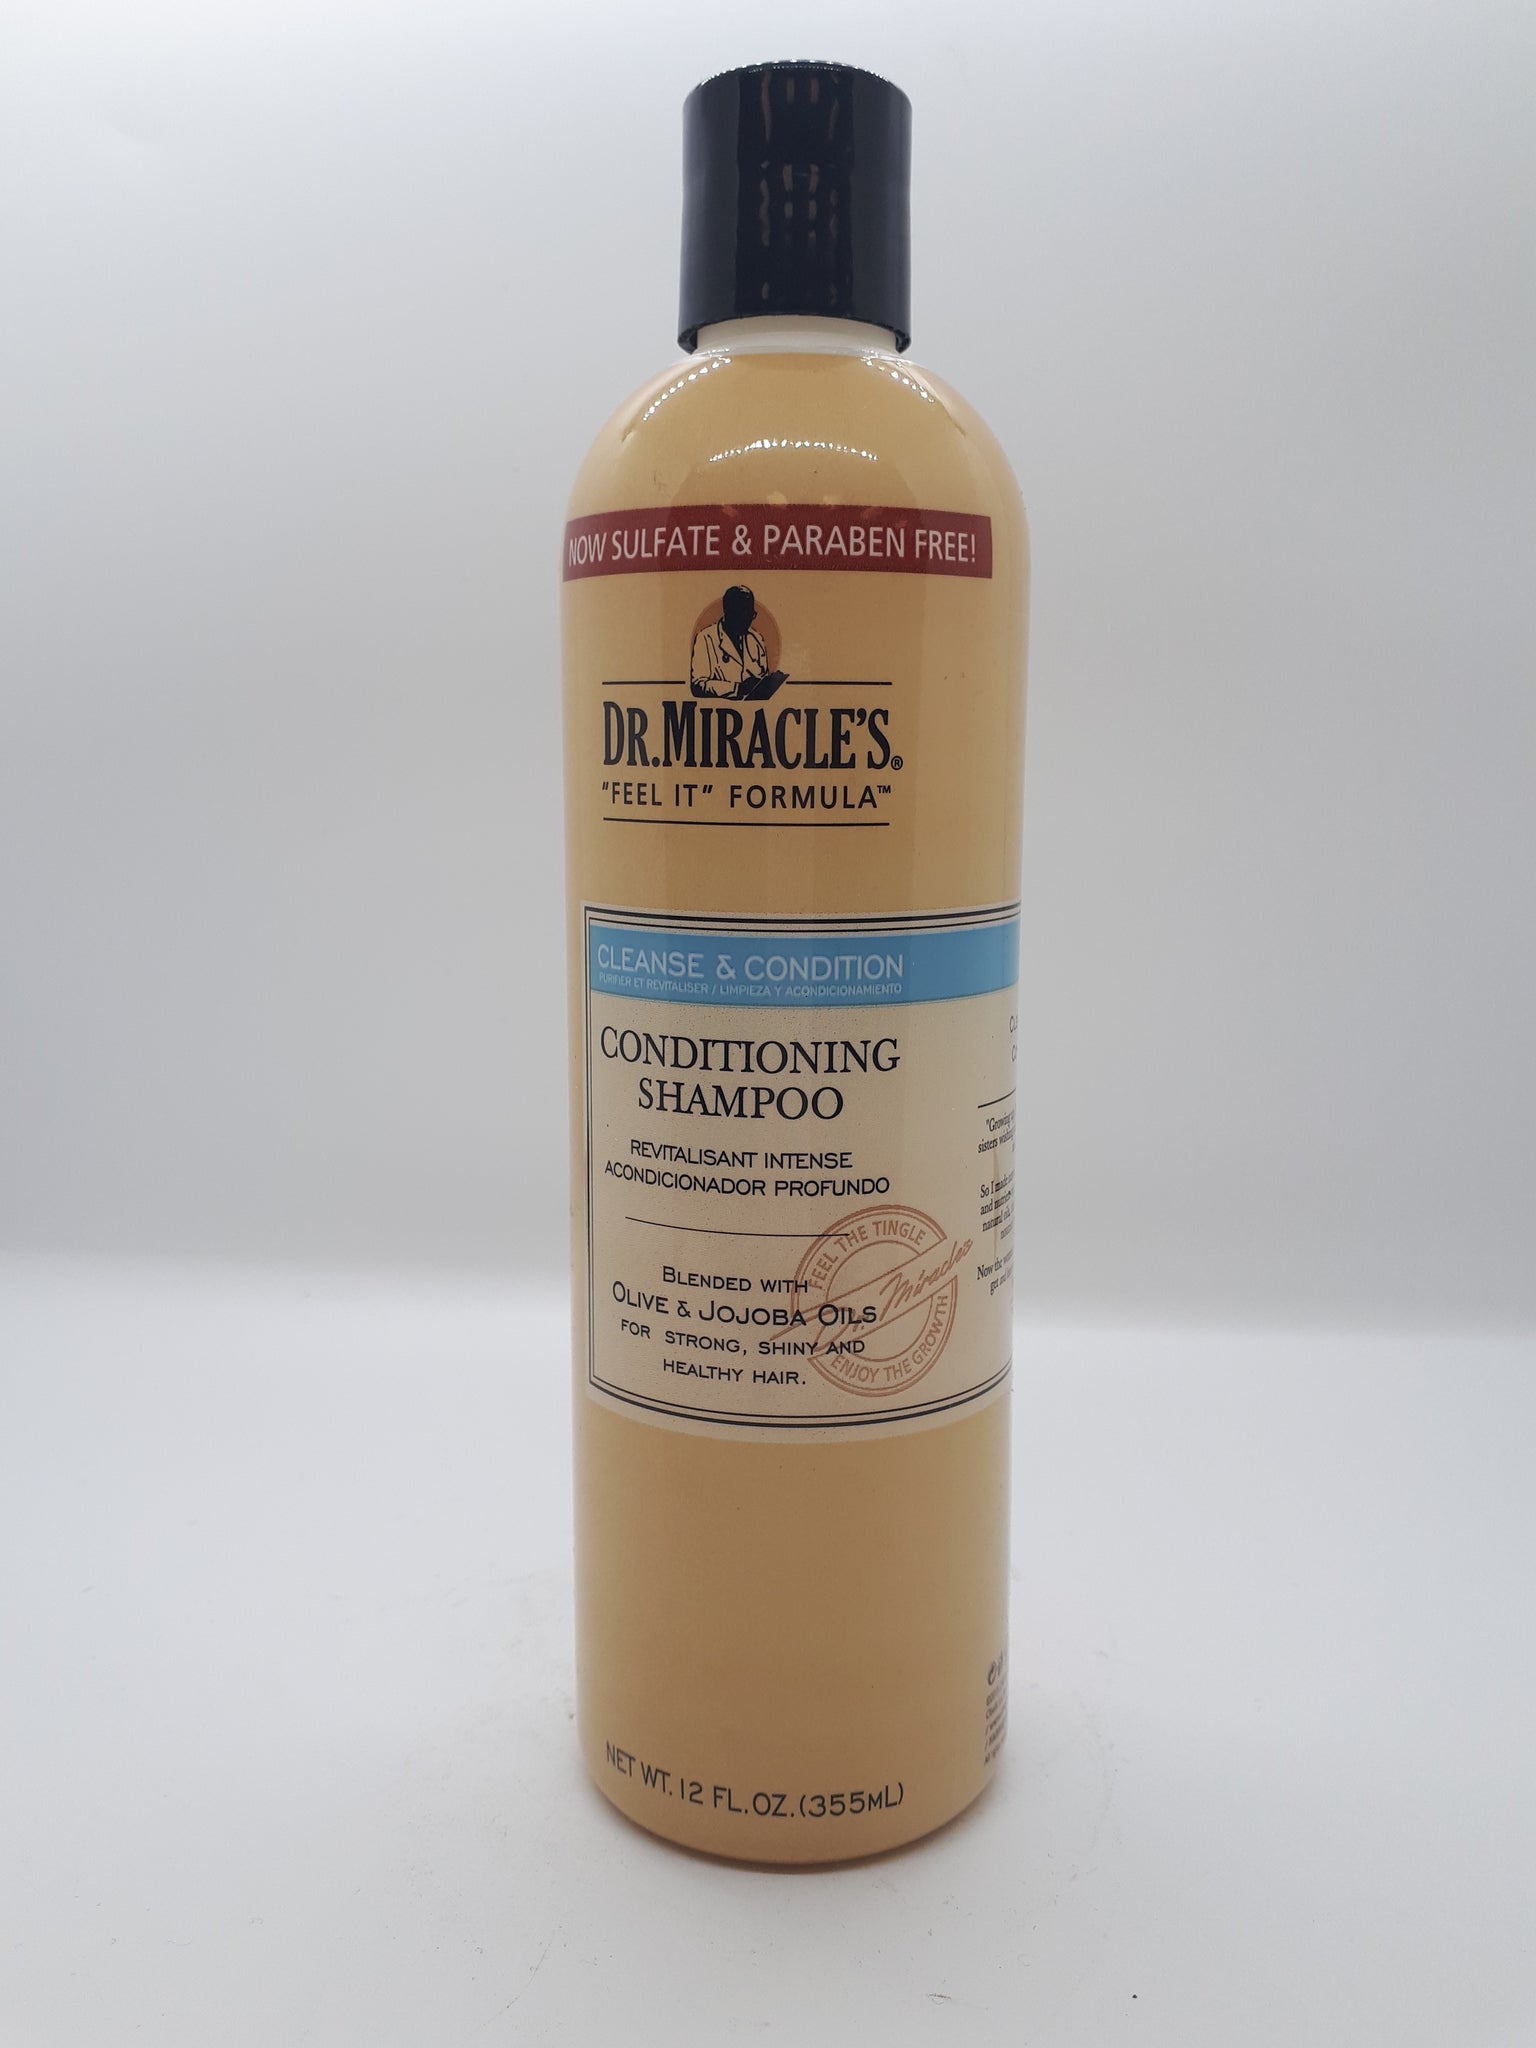 DR. MIRACLE’S - CONDITIONING SHAMPOO